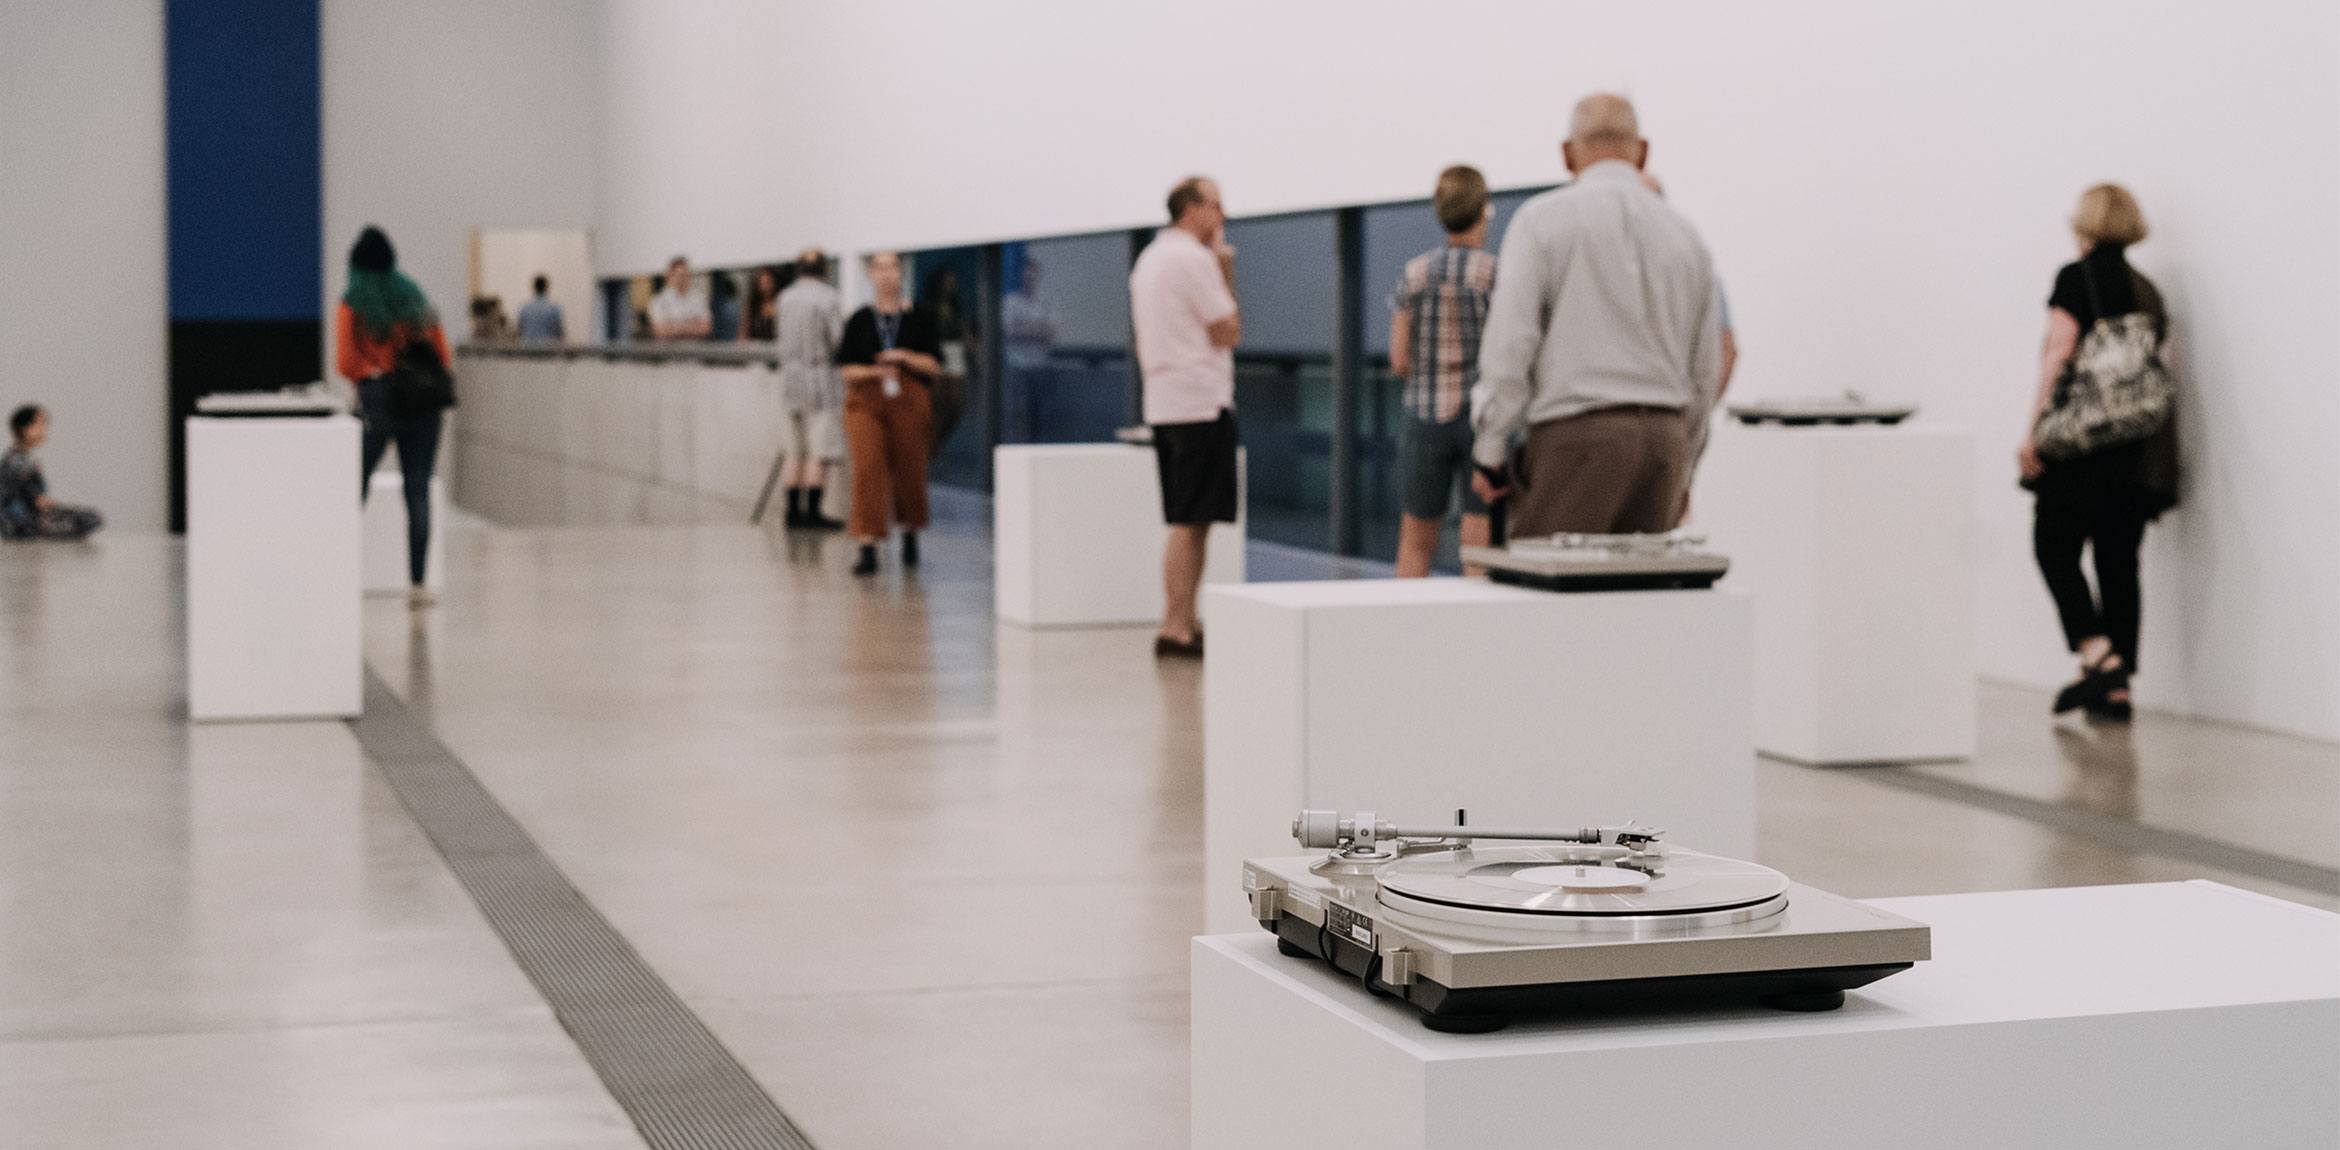 Visitors congregate in the Main Gallery, and the camera focuses on one of Susan Philipsz's turntables on a podium.